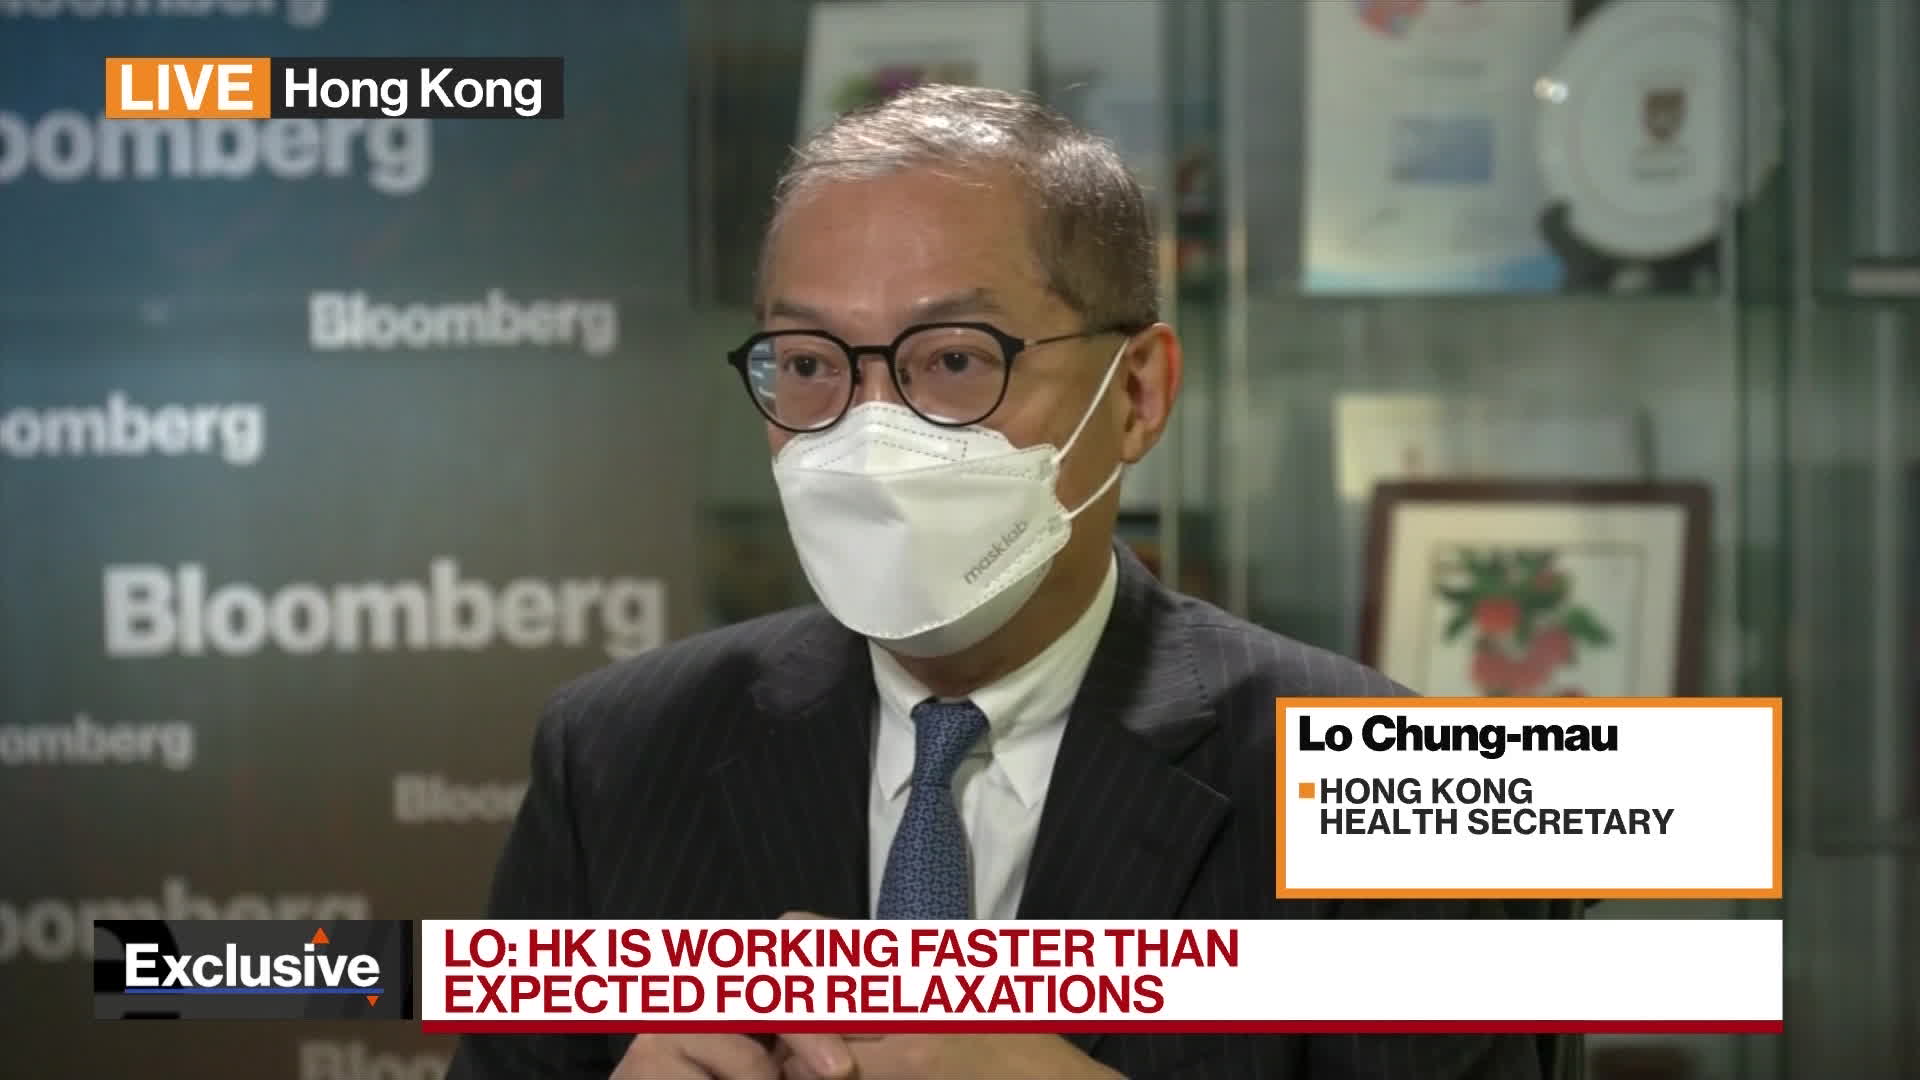 Hong Kong Looking at Data for Further Relaxations: Health Secretary